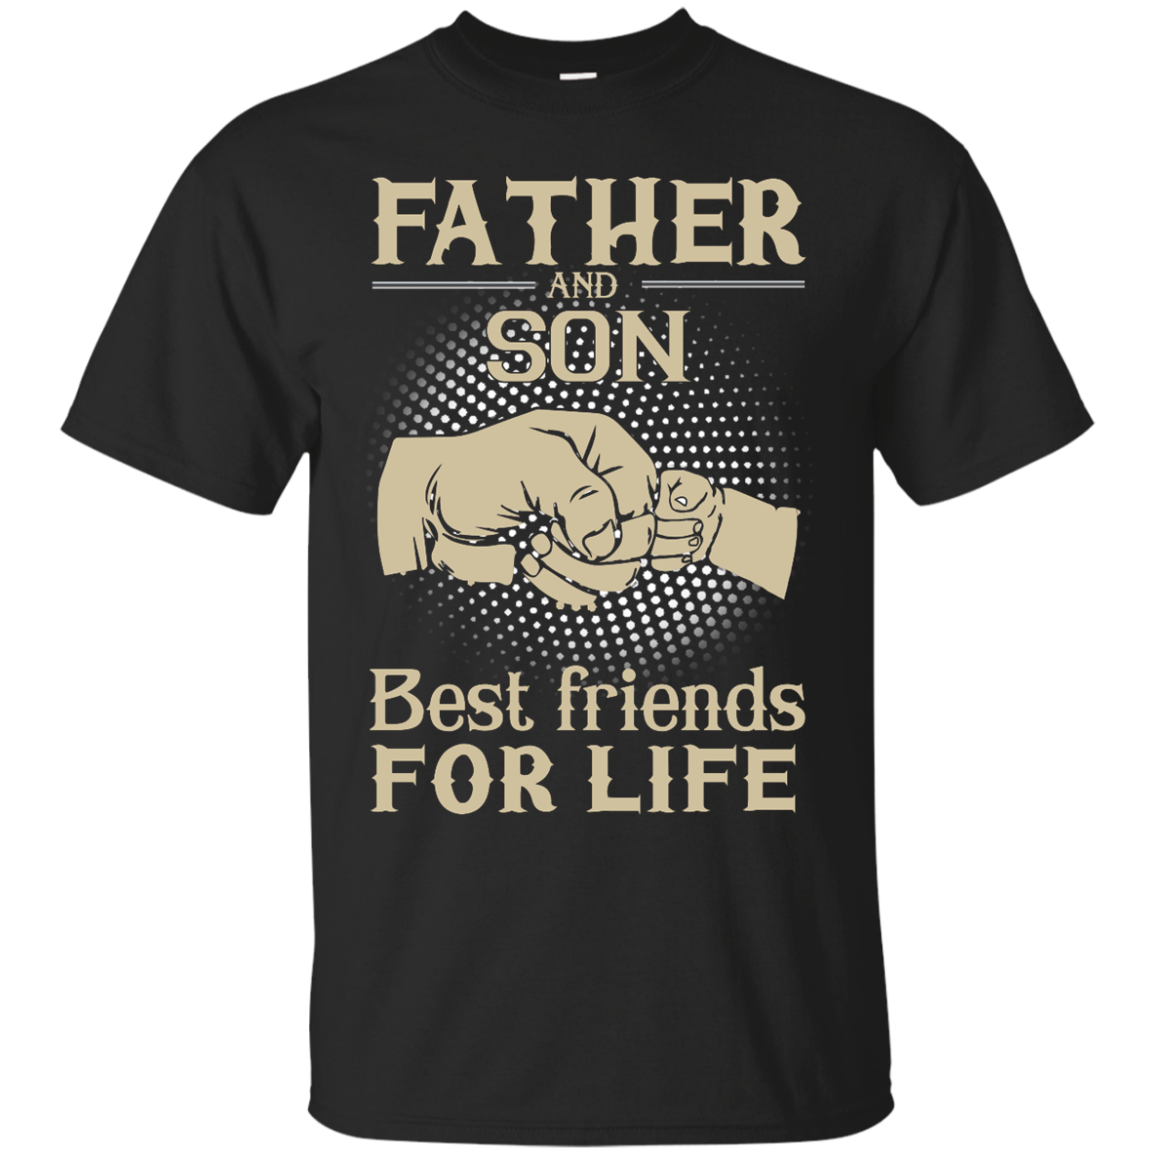 Father and Son best friends for life shirt, sweater, hoodie